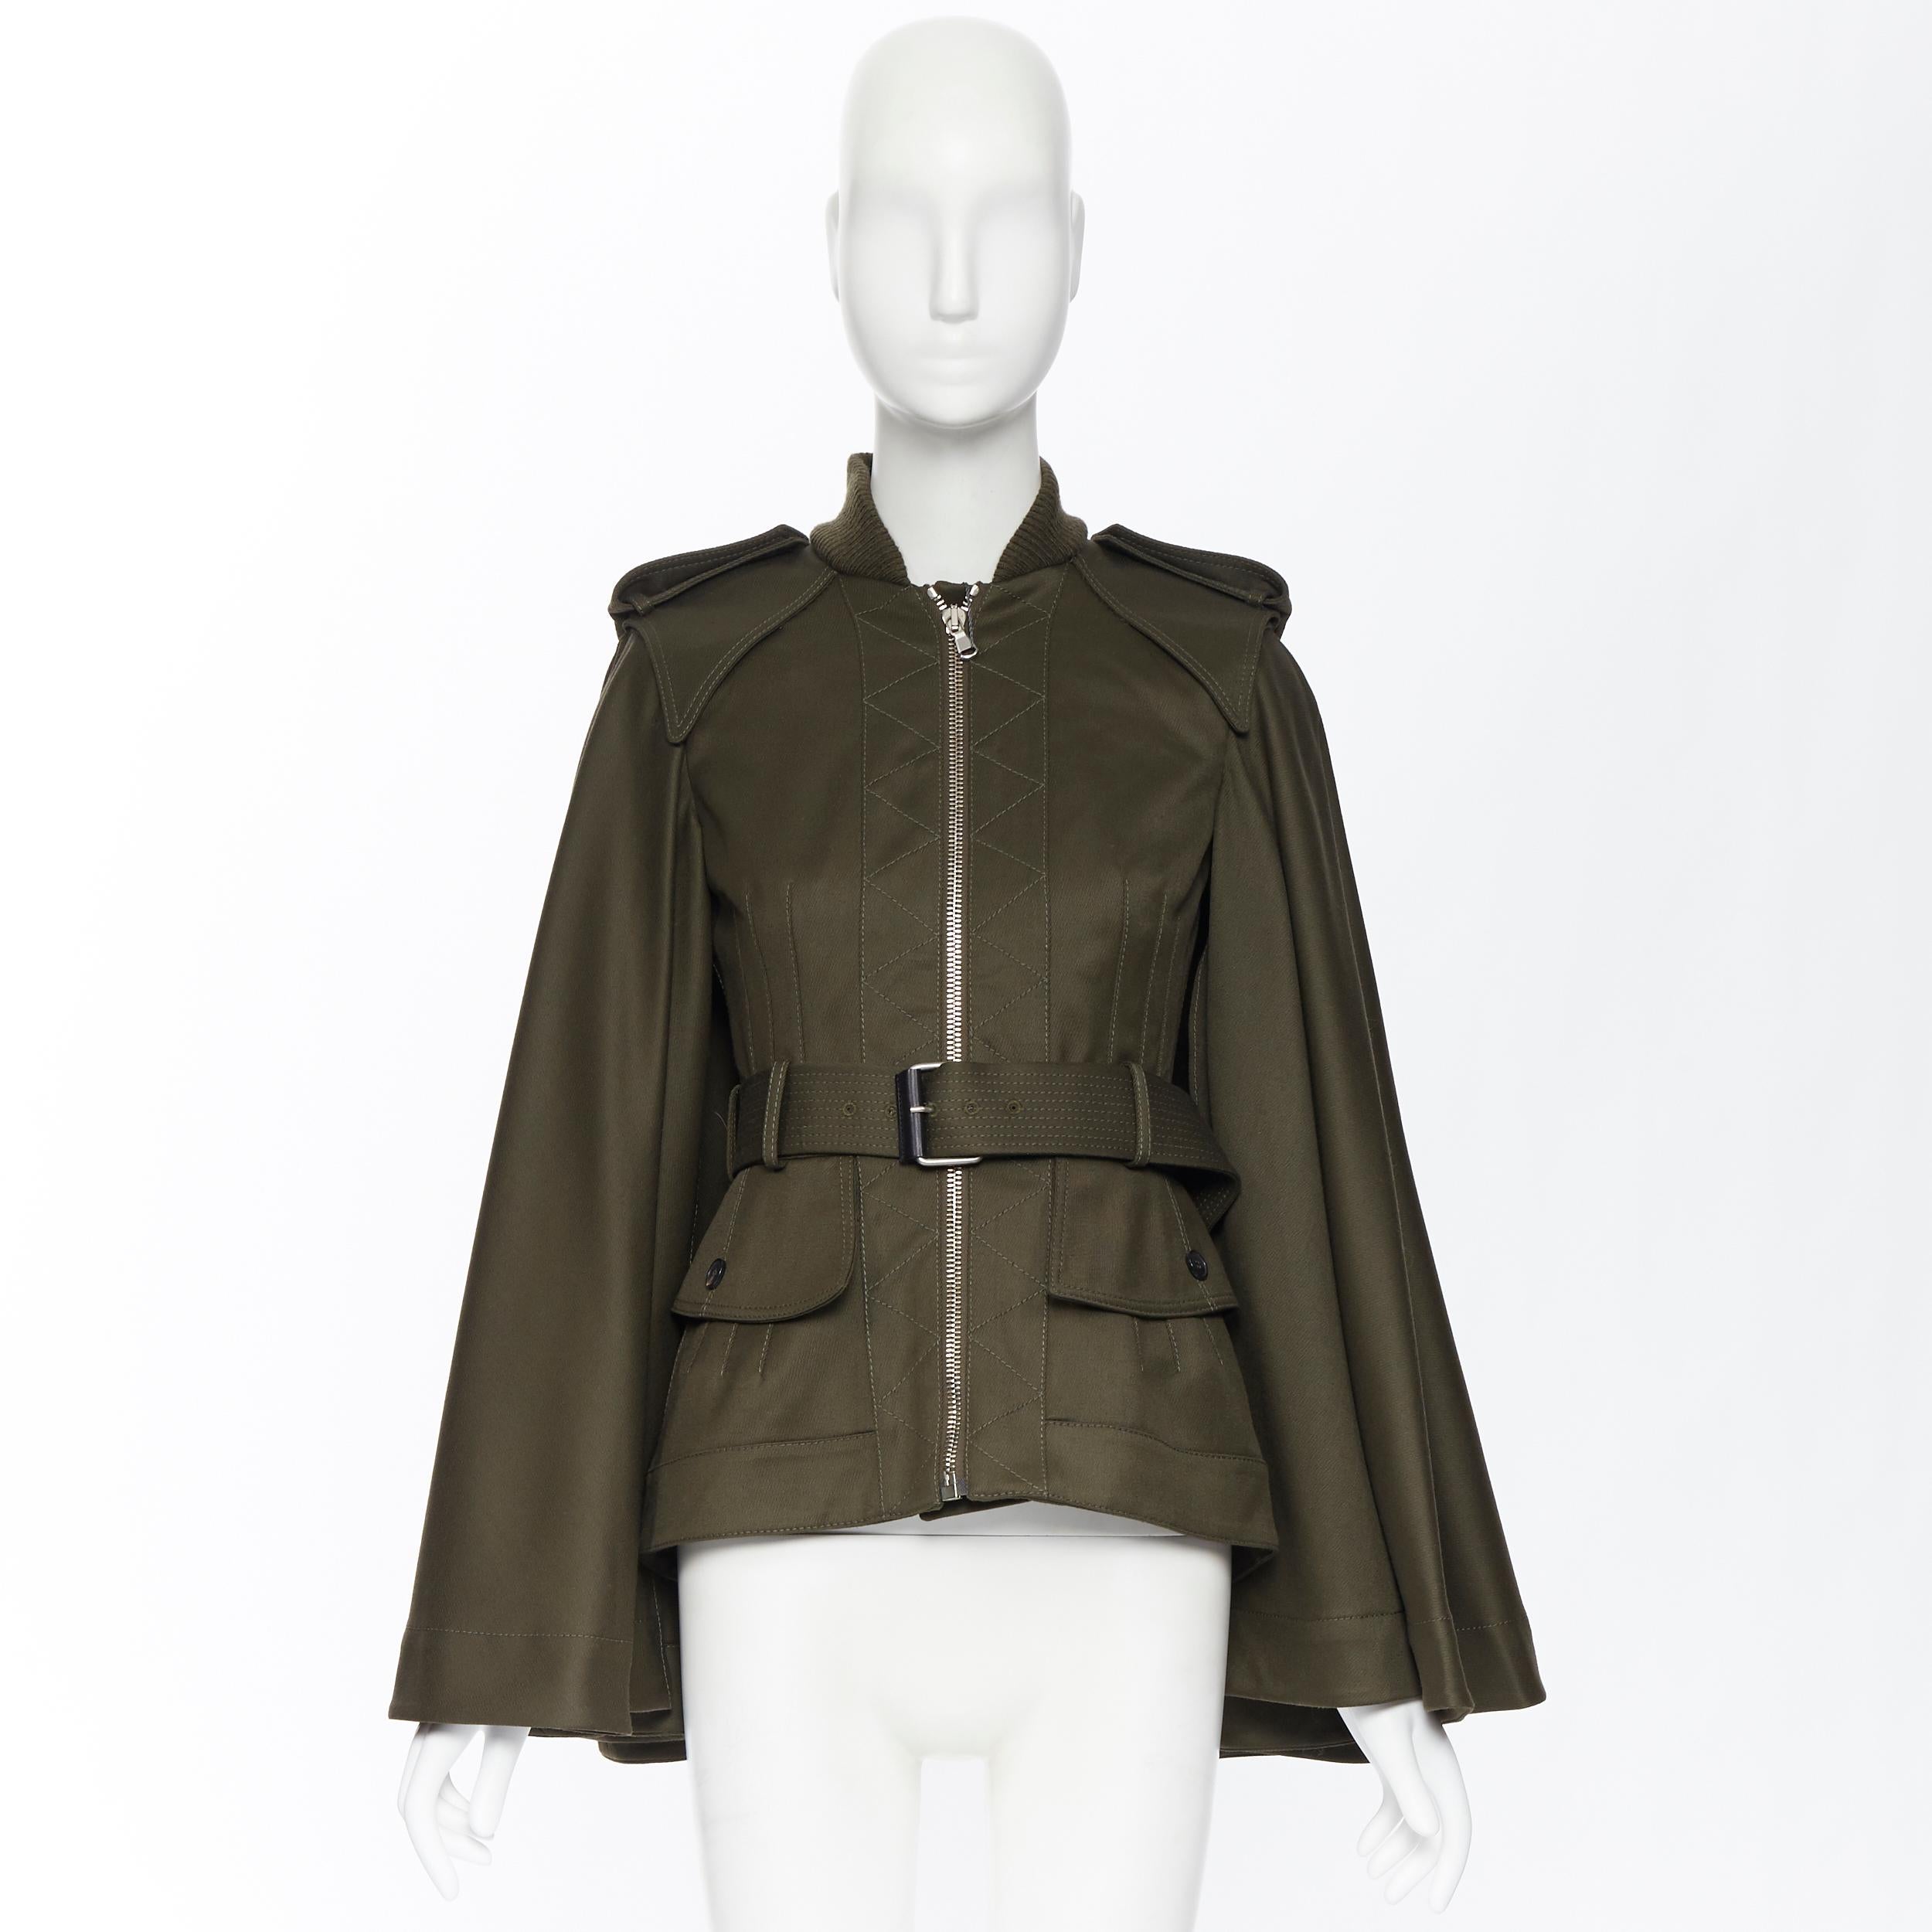 new ALEXANDER MCQUEEN 2015 khaki green belted military cape jacket IT36 XS
Reference: TGAS/A05052
Brand: Alexander McQueen
Designer: Sarah Burton
Collection: 2015 
Material: Cotton
Color: Green
Pattern: Solid
Closure: Zip
Extra Detail: Removable